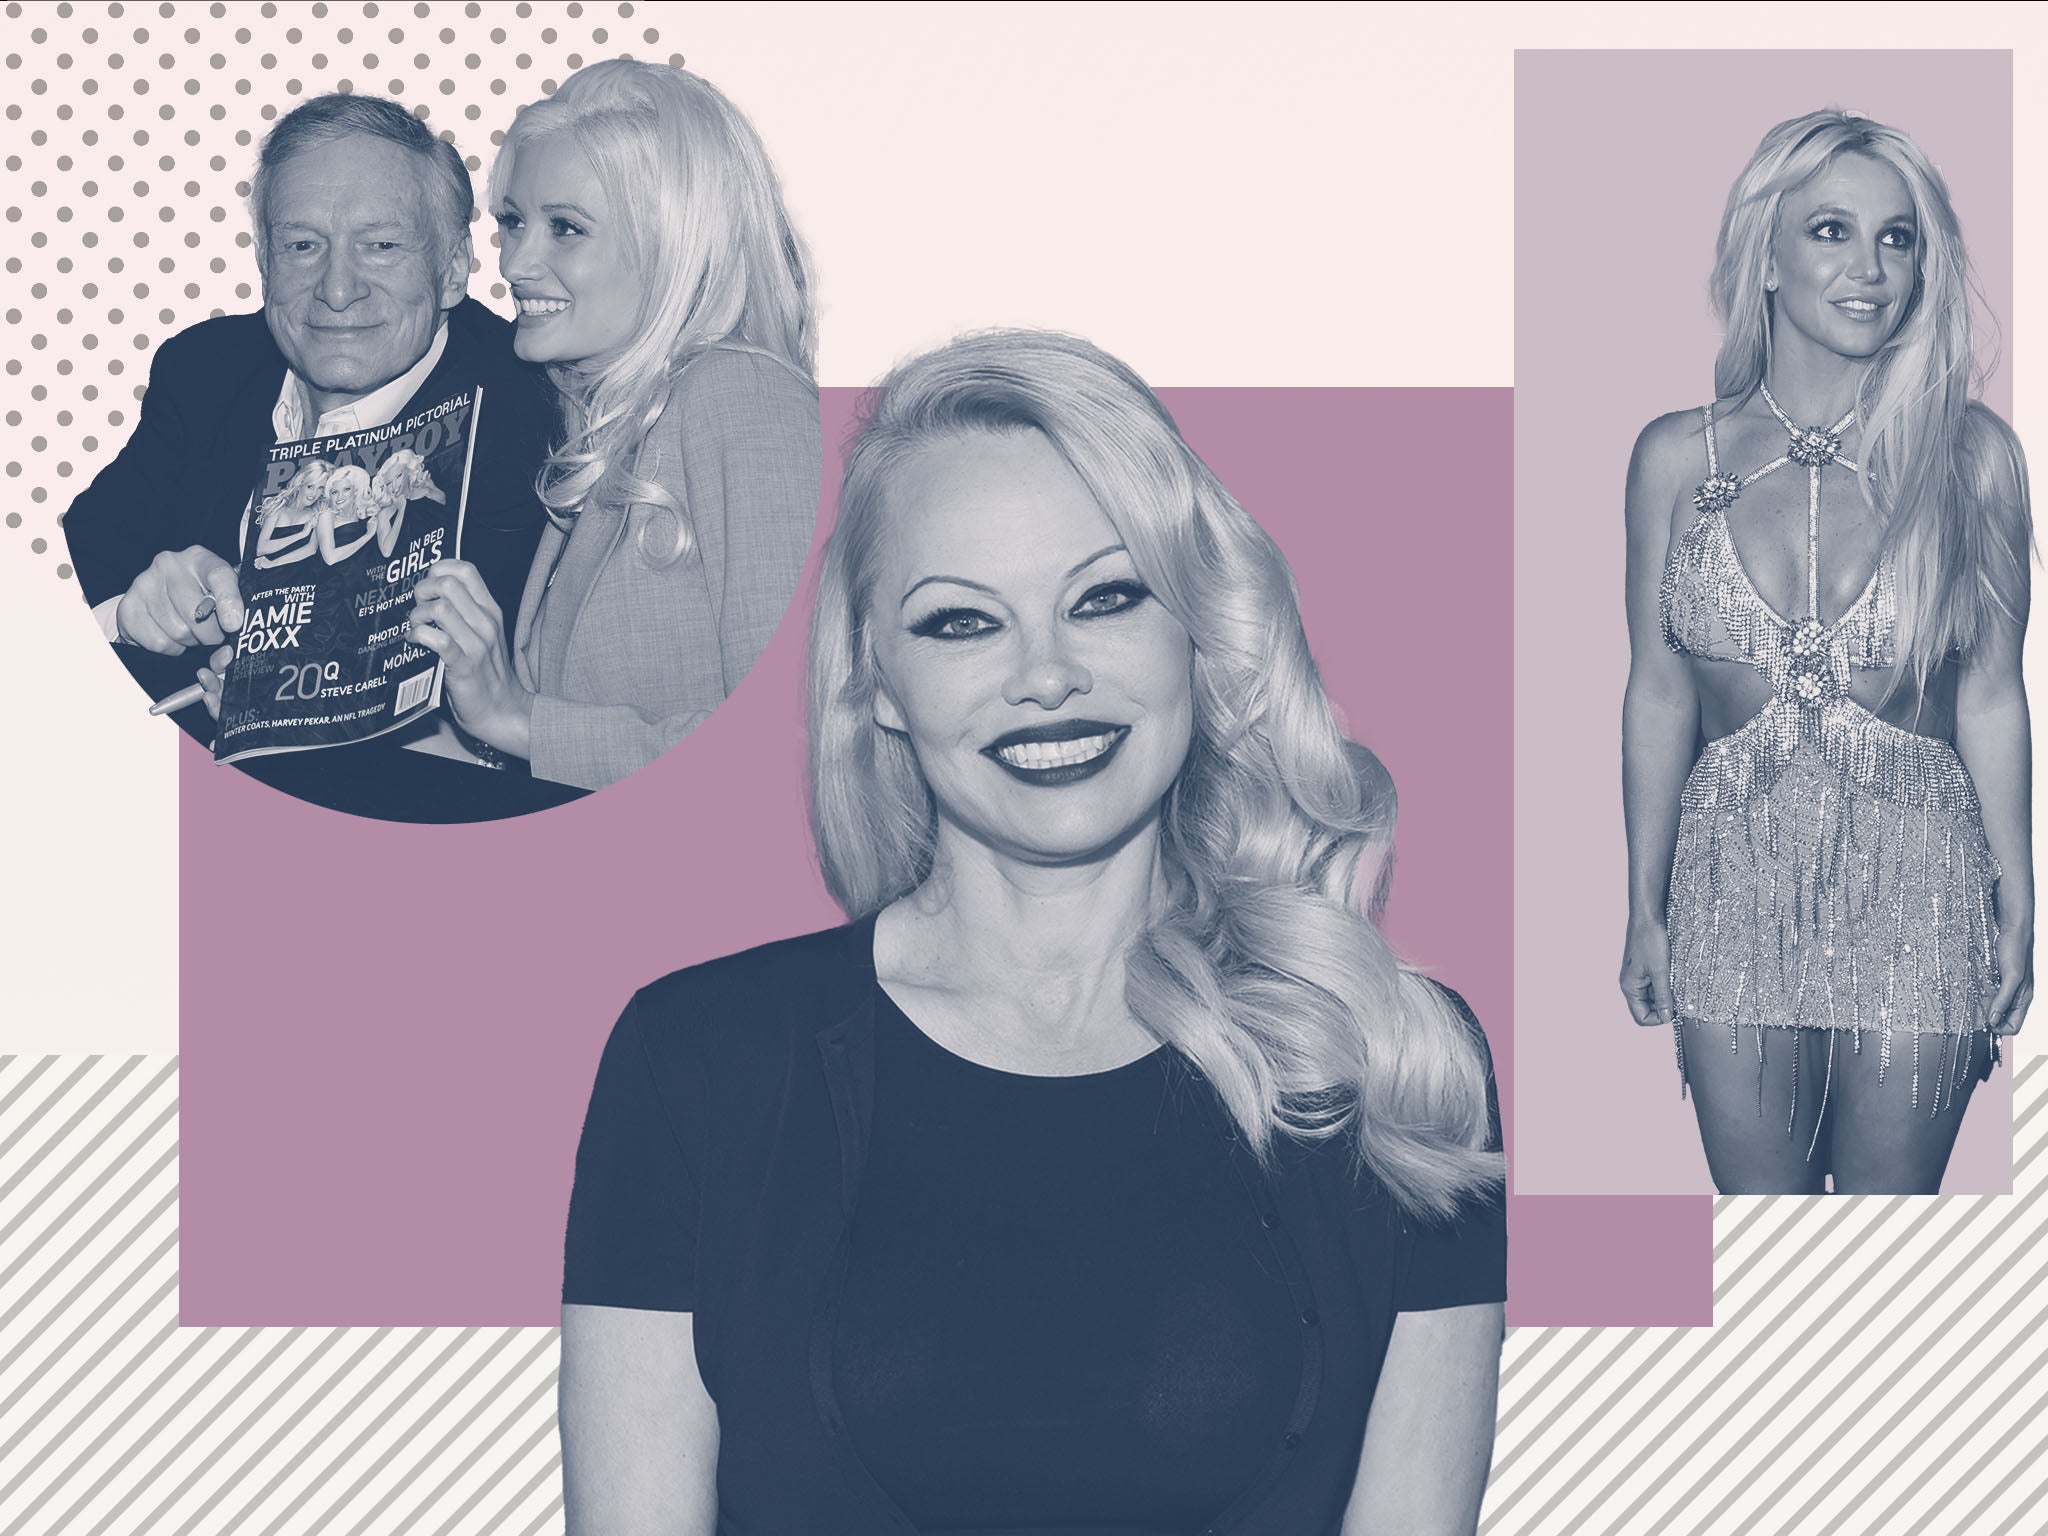 Holly Madison, top left, with Hugh Hefner, Anderson centre, and Spears, right, have all led lives exemplified by the Faustian bargain entered by women made famous for their looks